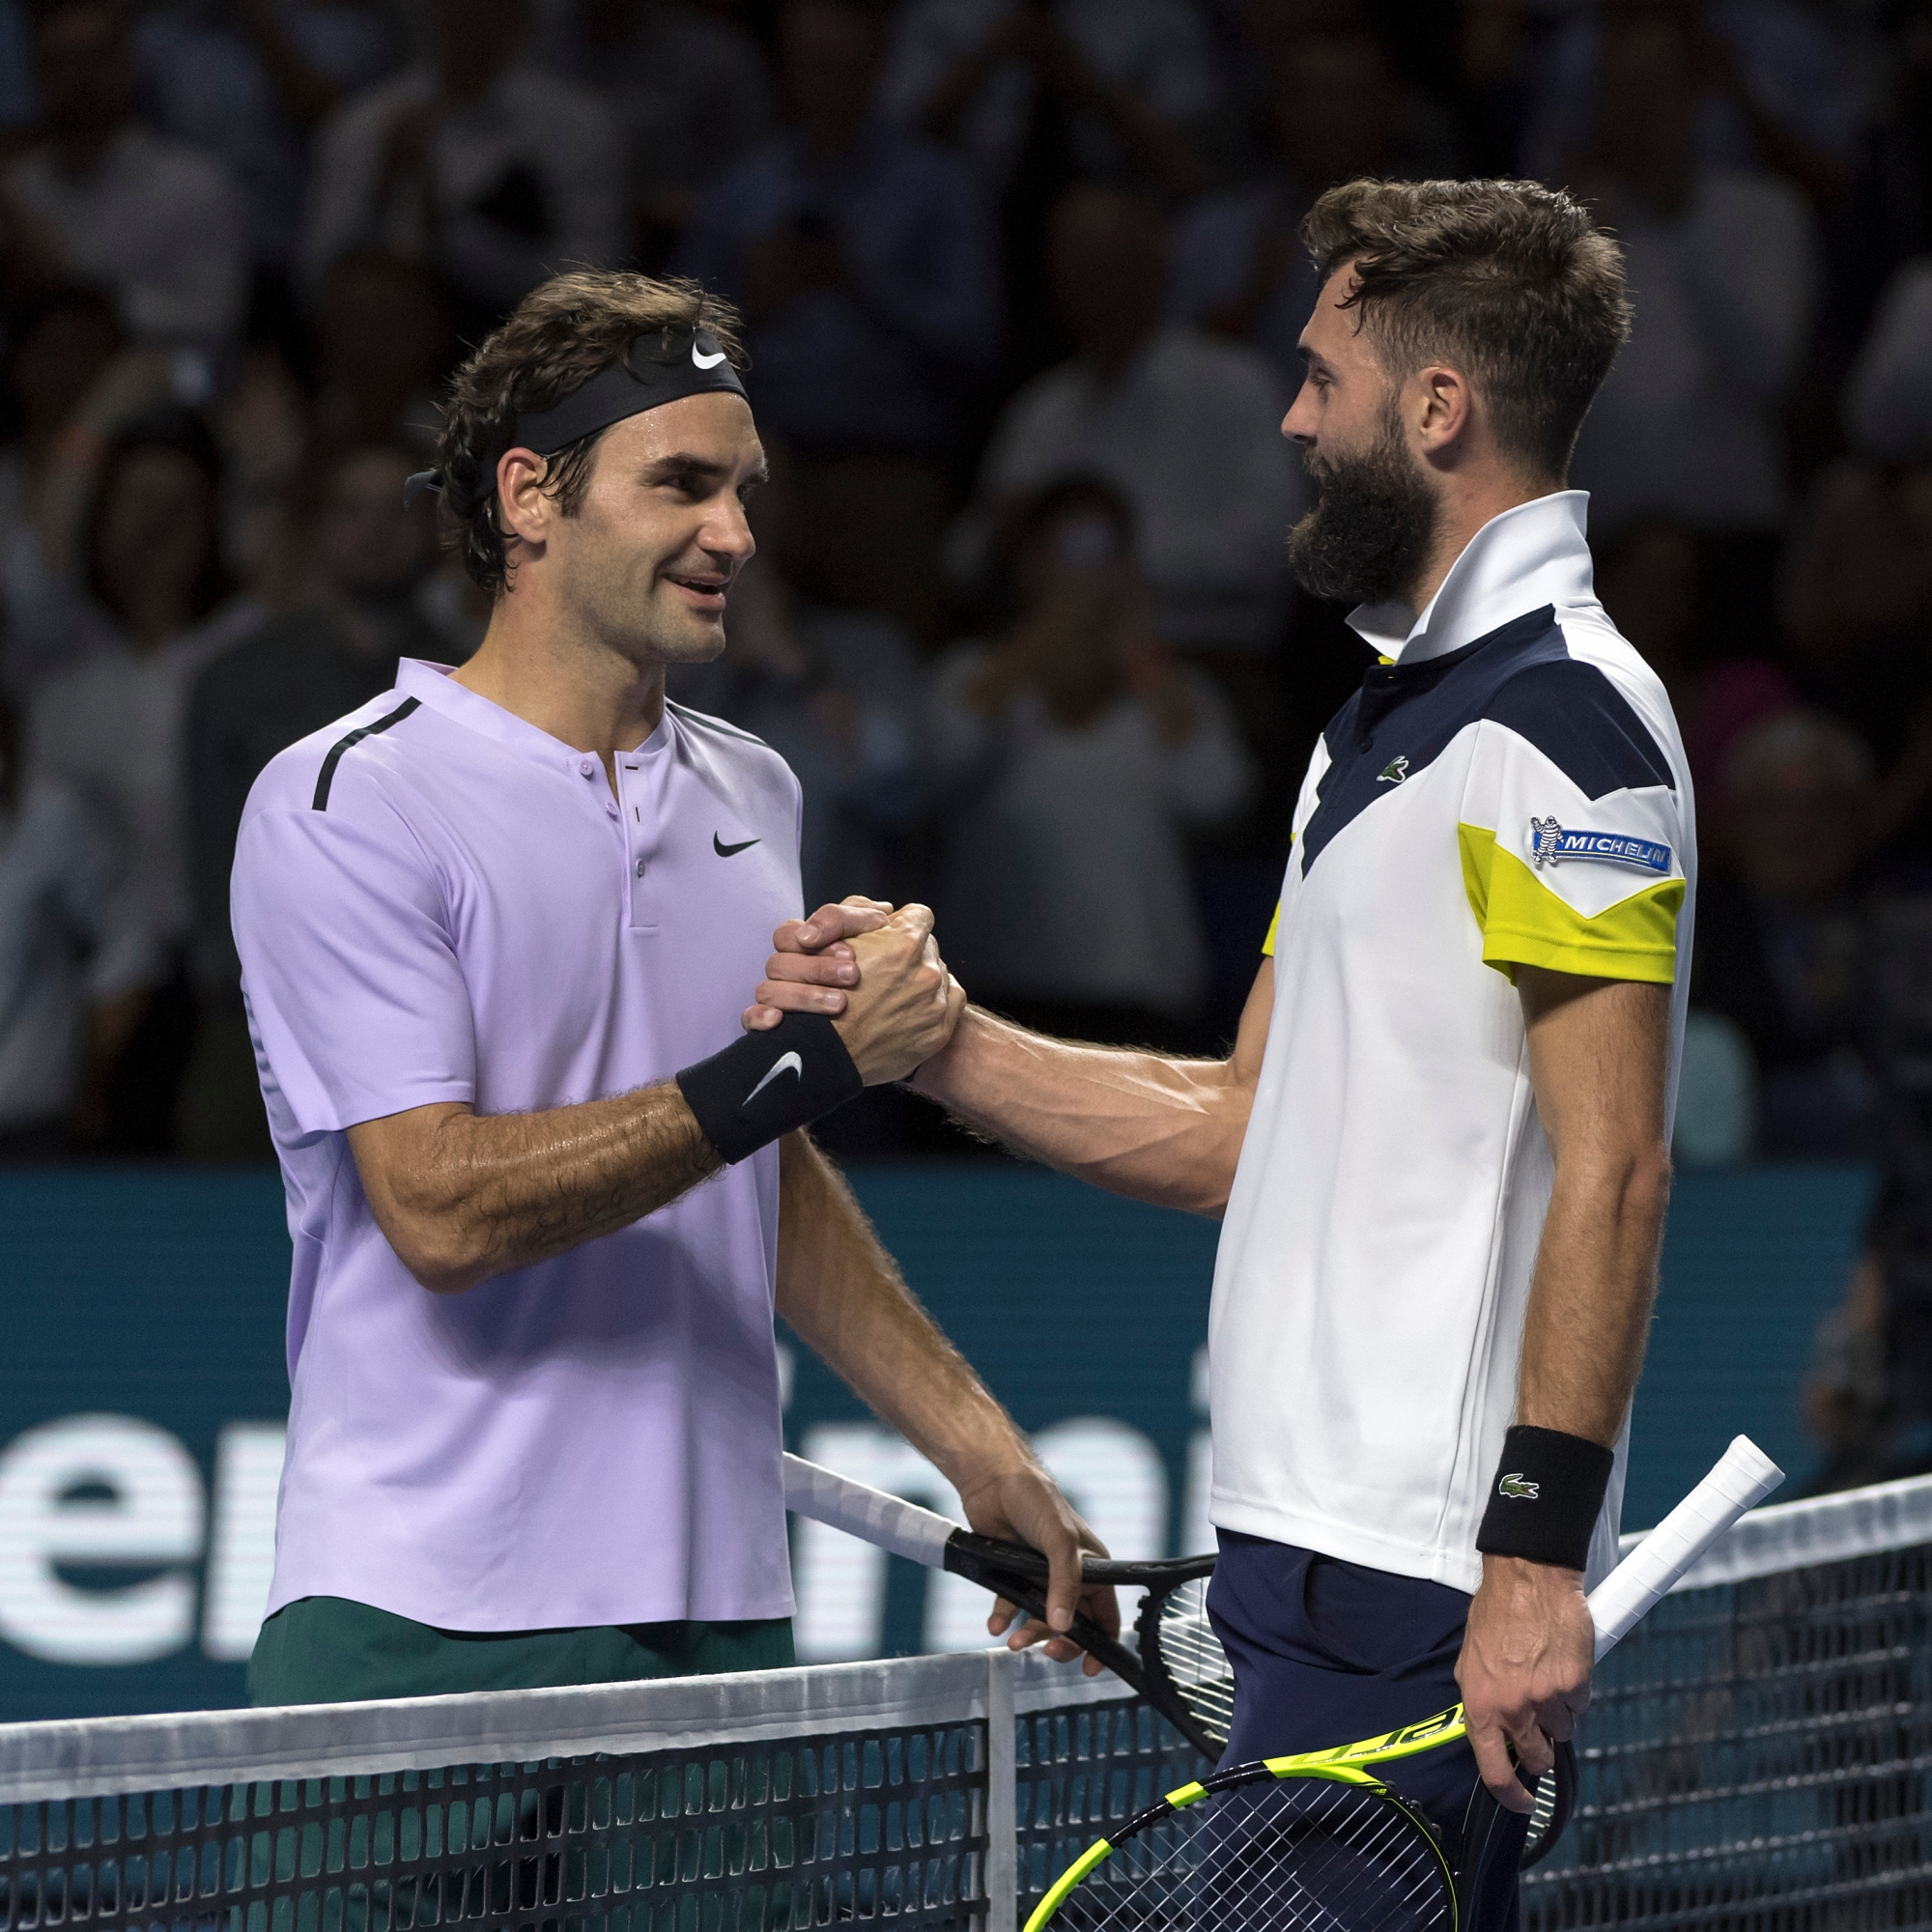 France's Benoit Paire, right, congratulates Switzerland's Roger Federer, left, after their round of sixteen match at the Swiss Indoors tennis tournament at the St. Jakobshalle in Basel, Switzerland, on Thursday, October 26, 2017. (KEYSTONE/Georgios Kefalas) TENNIS ATP 500 WORLD TOUR 2017 BASEL